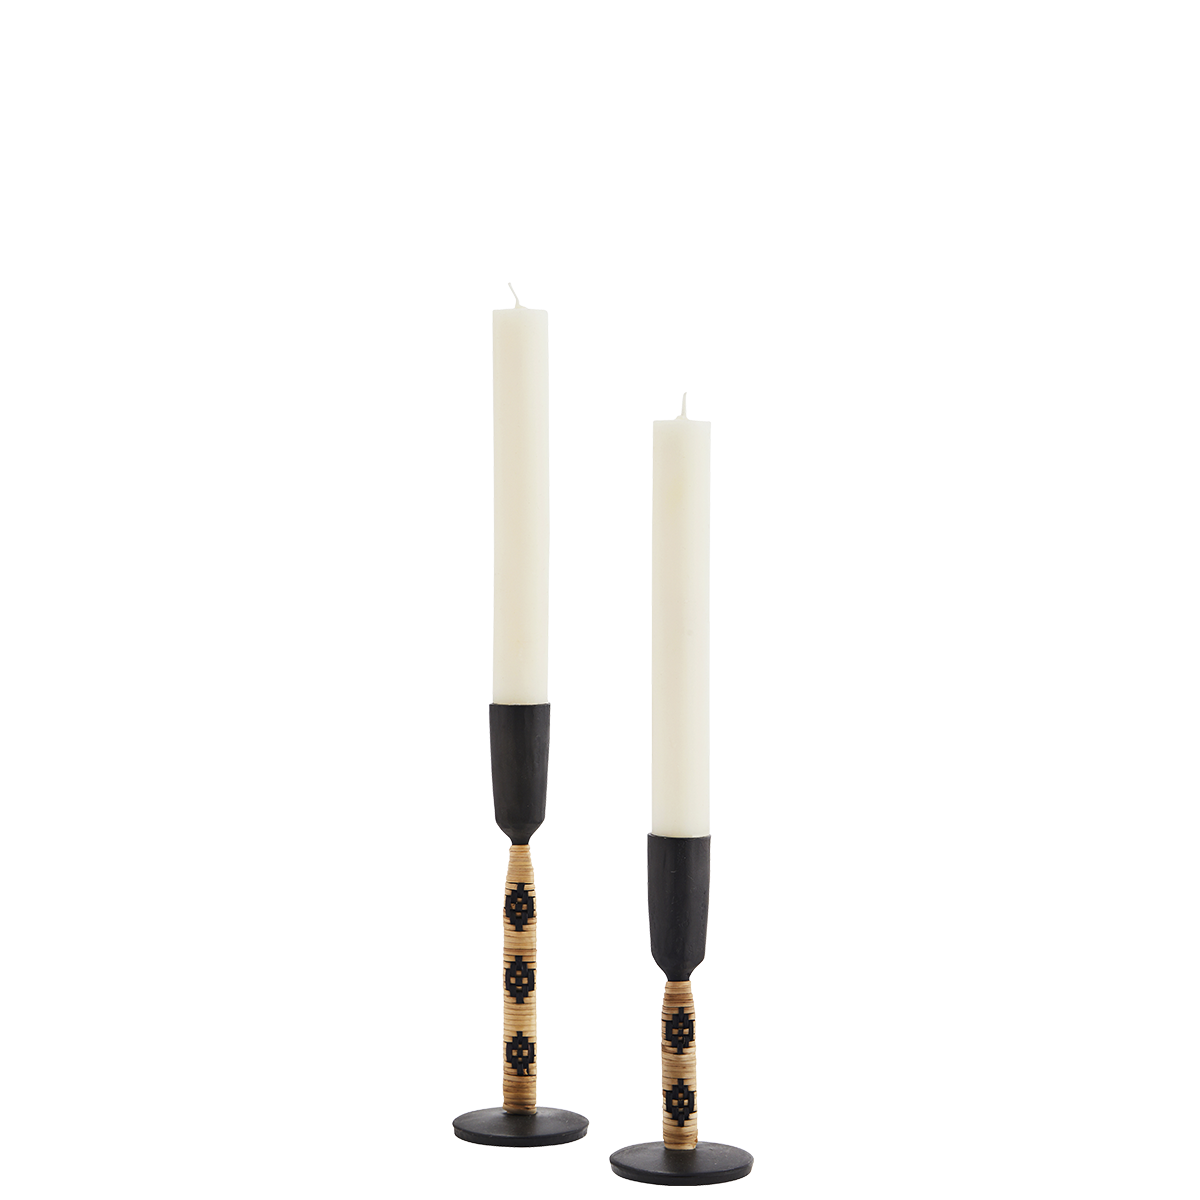 Iron candle holders w/ bamboo